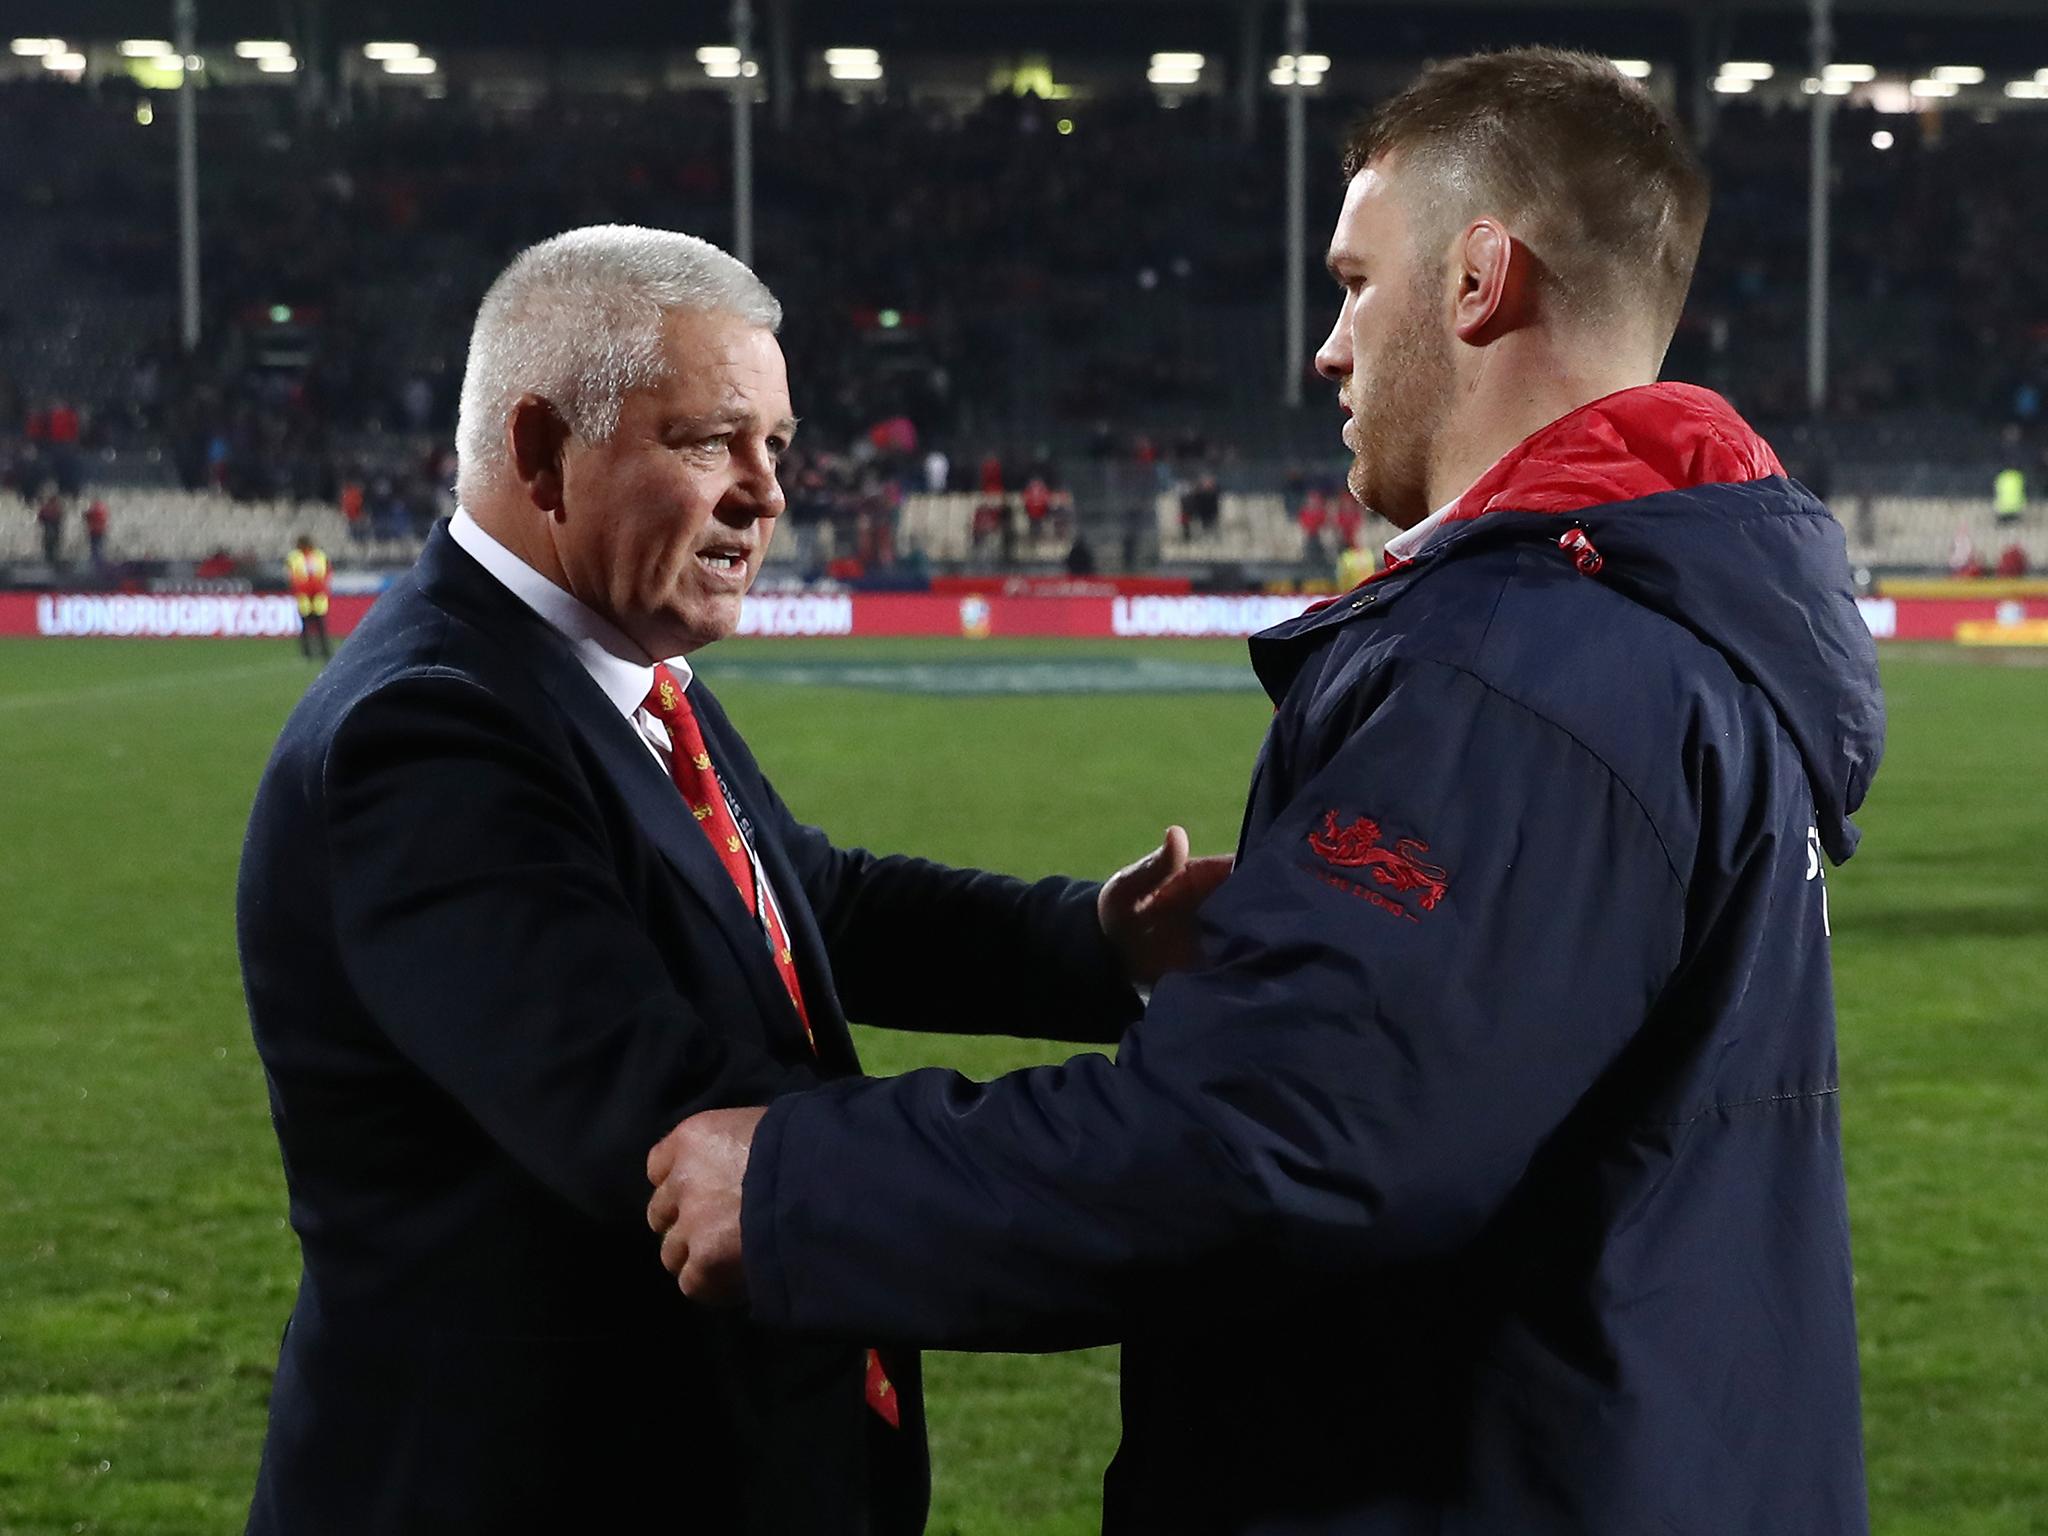 Warren Gatland responded publicly to Sean O'Brien's criticism of the British and Irish Lions coaching staff